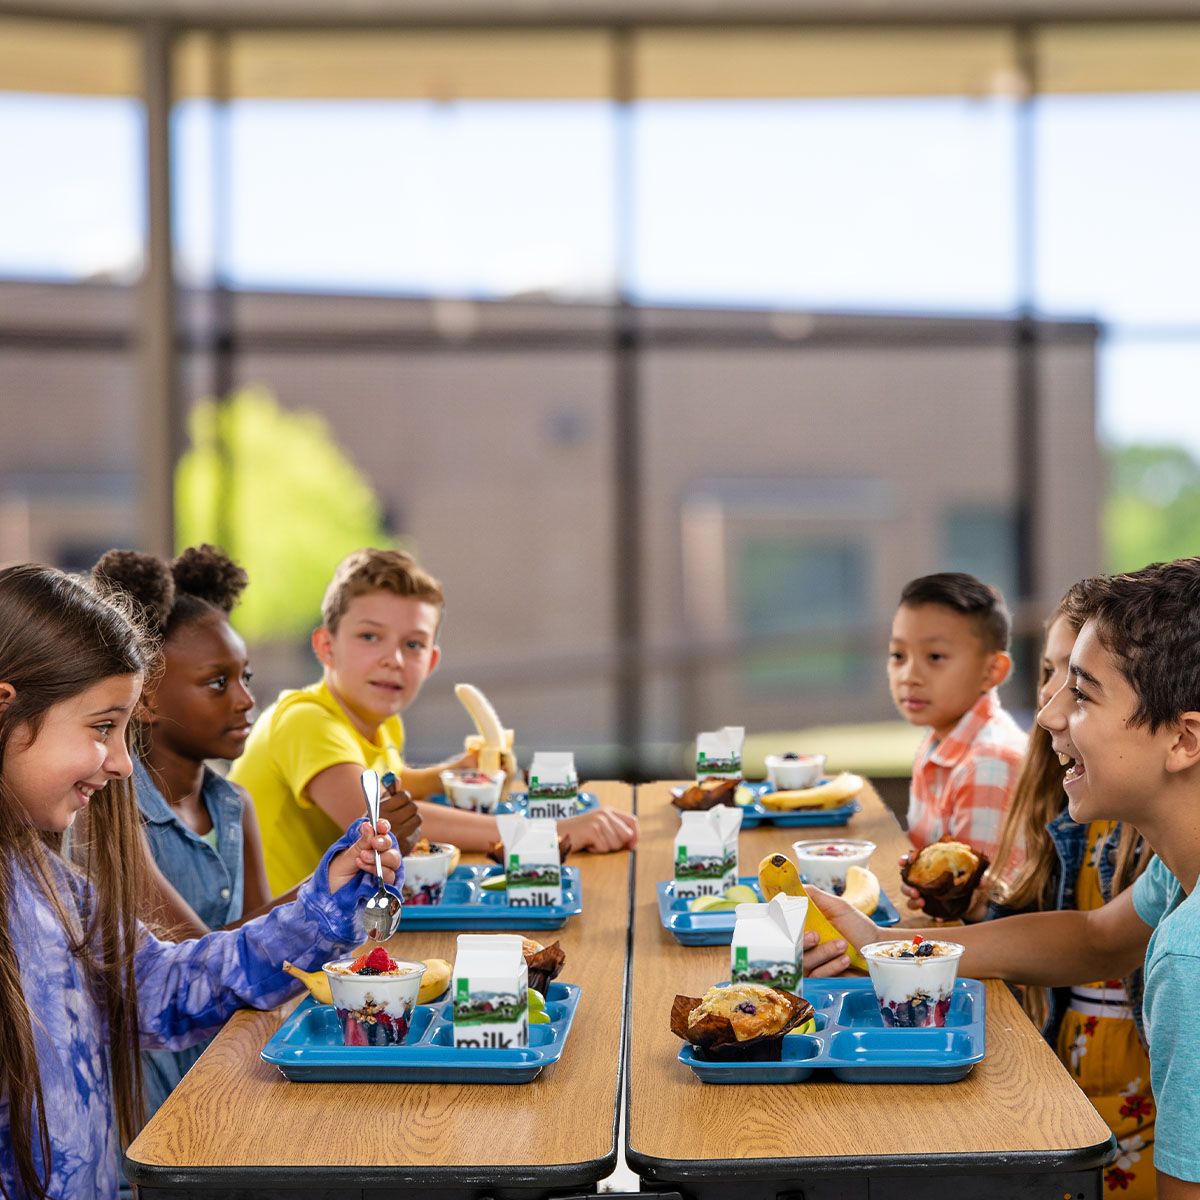 Children eating in a cafeteria